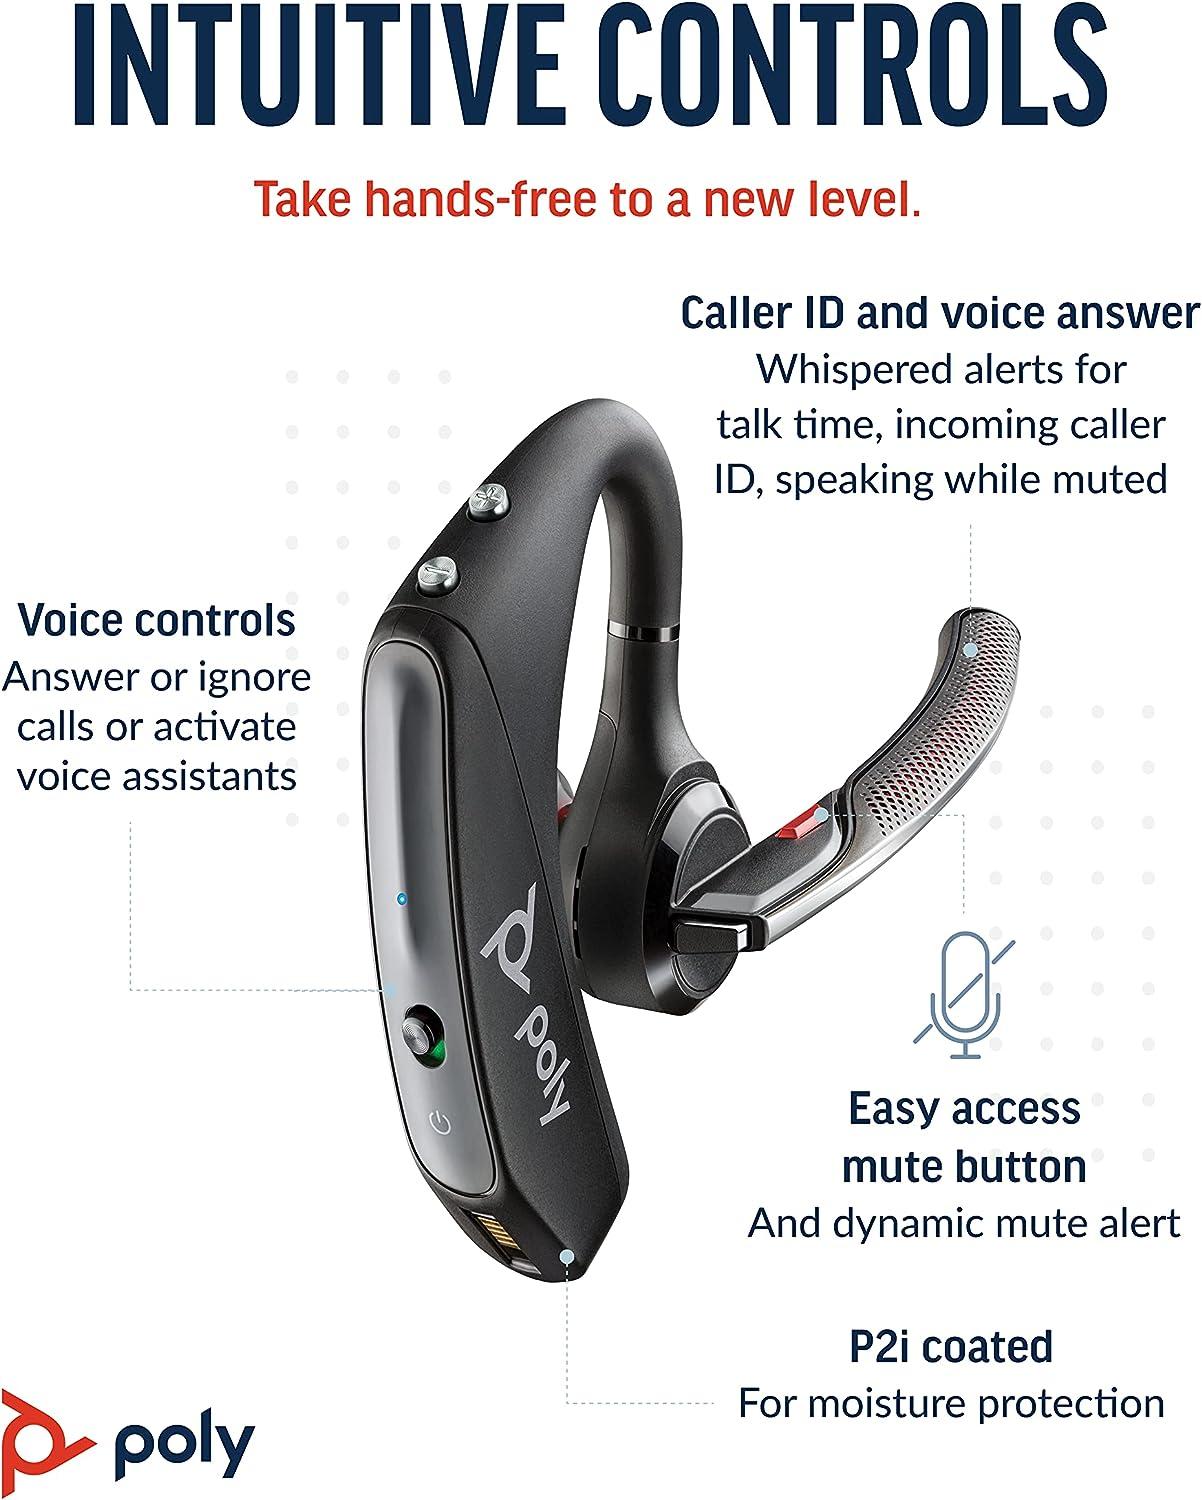 Single-Ear Controls Poly via Headset Ergonomic Mic Connect Wireless w/Noise-Canceling (Plantronics) - - Lightweight - Mobile/Tablet Design Headset Bluetooth to Voyager 5200 - Bluetooth - Voice